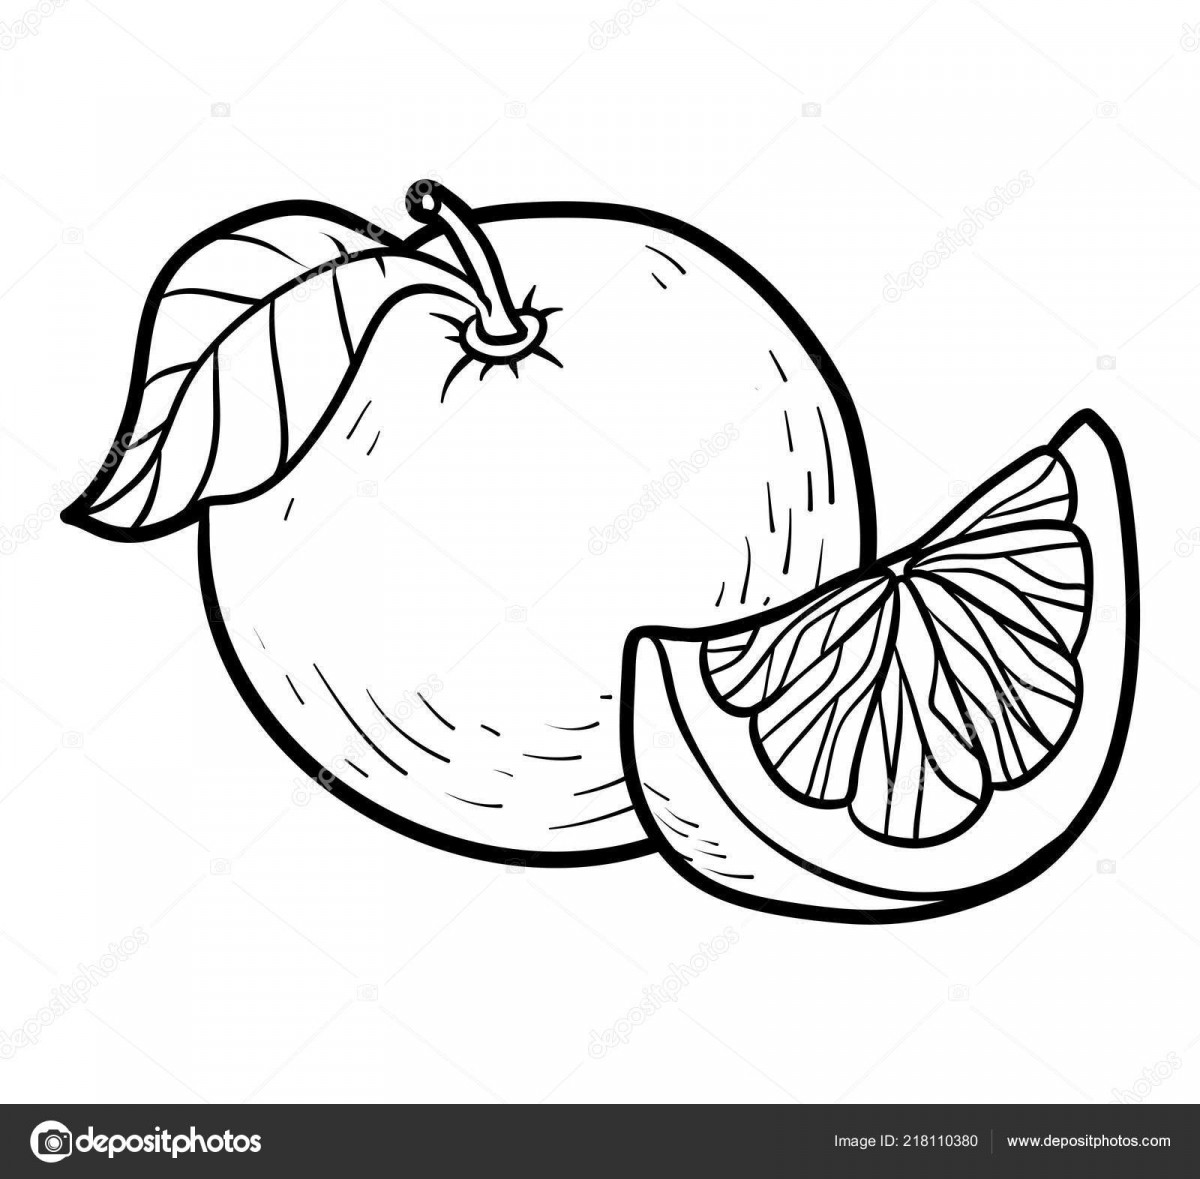 Tong hop big picture, the most beautiful picture for you 4 - Synthesis of the most beautiful pomelo coloring pictures for kids